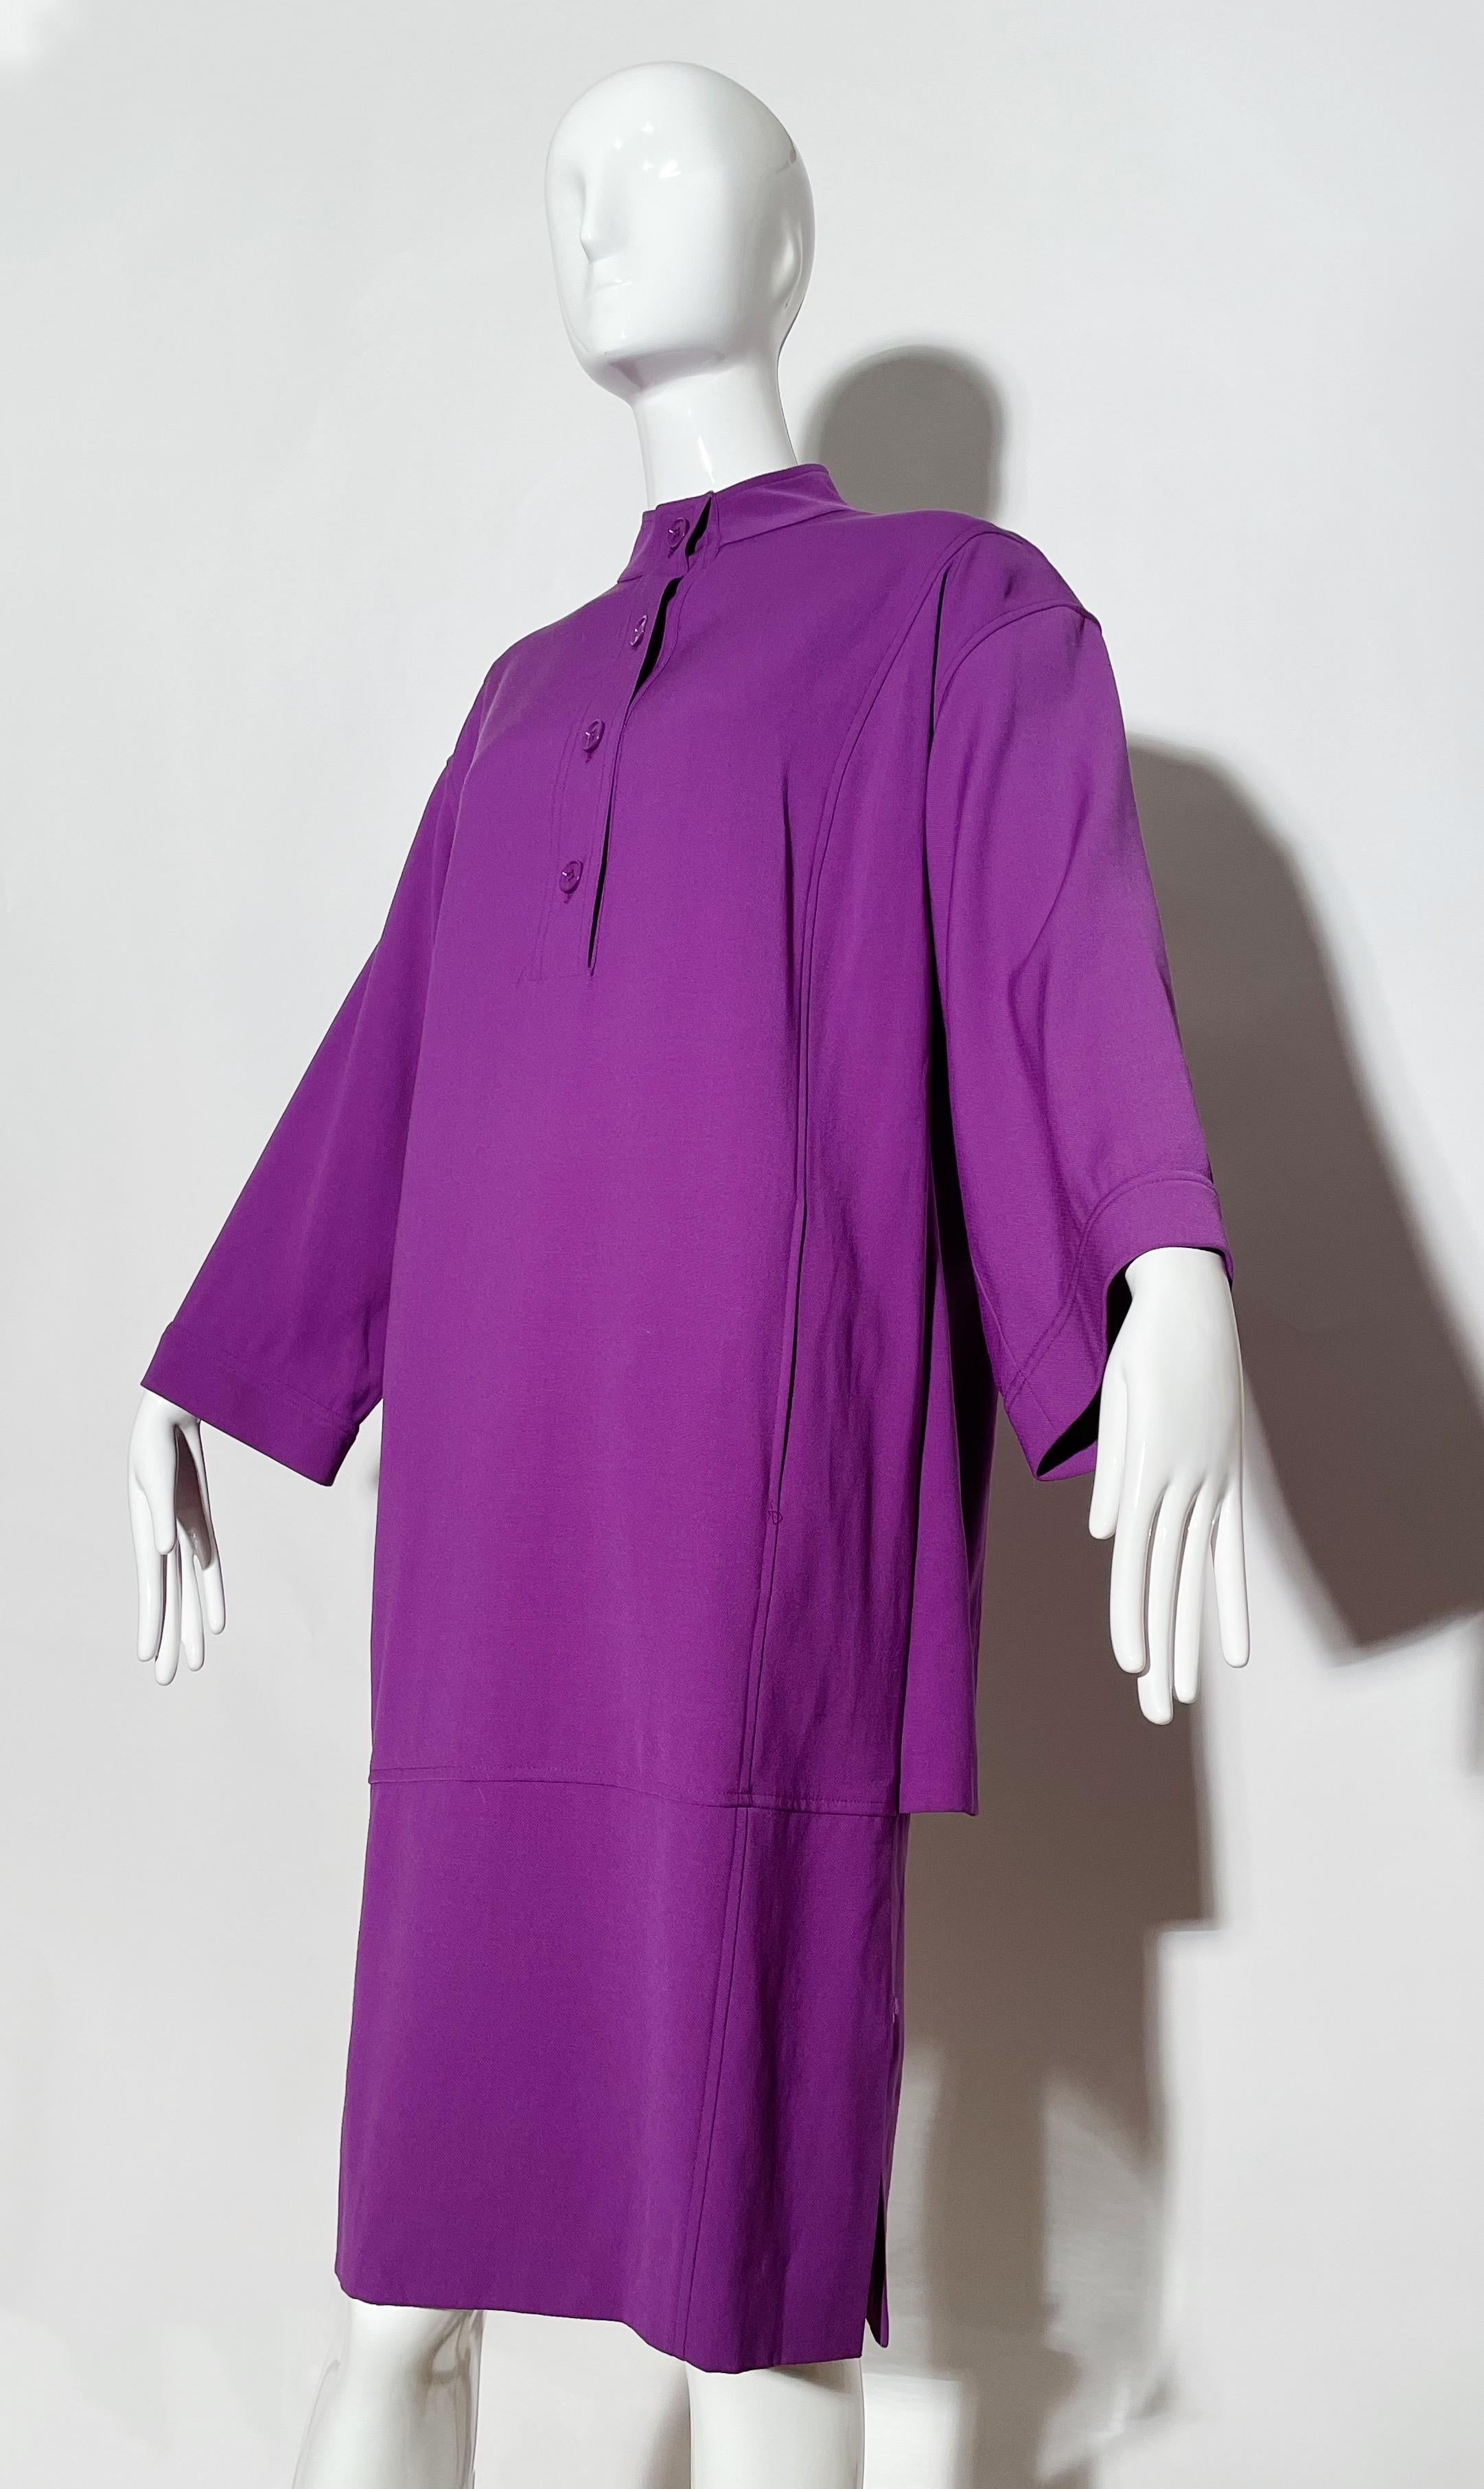 Gianfranco Ferre Tunic Dress In Good Condition For Sale In Waterford, MI